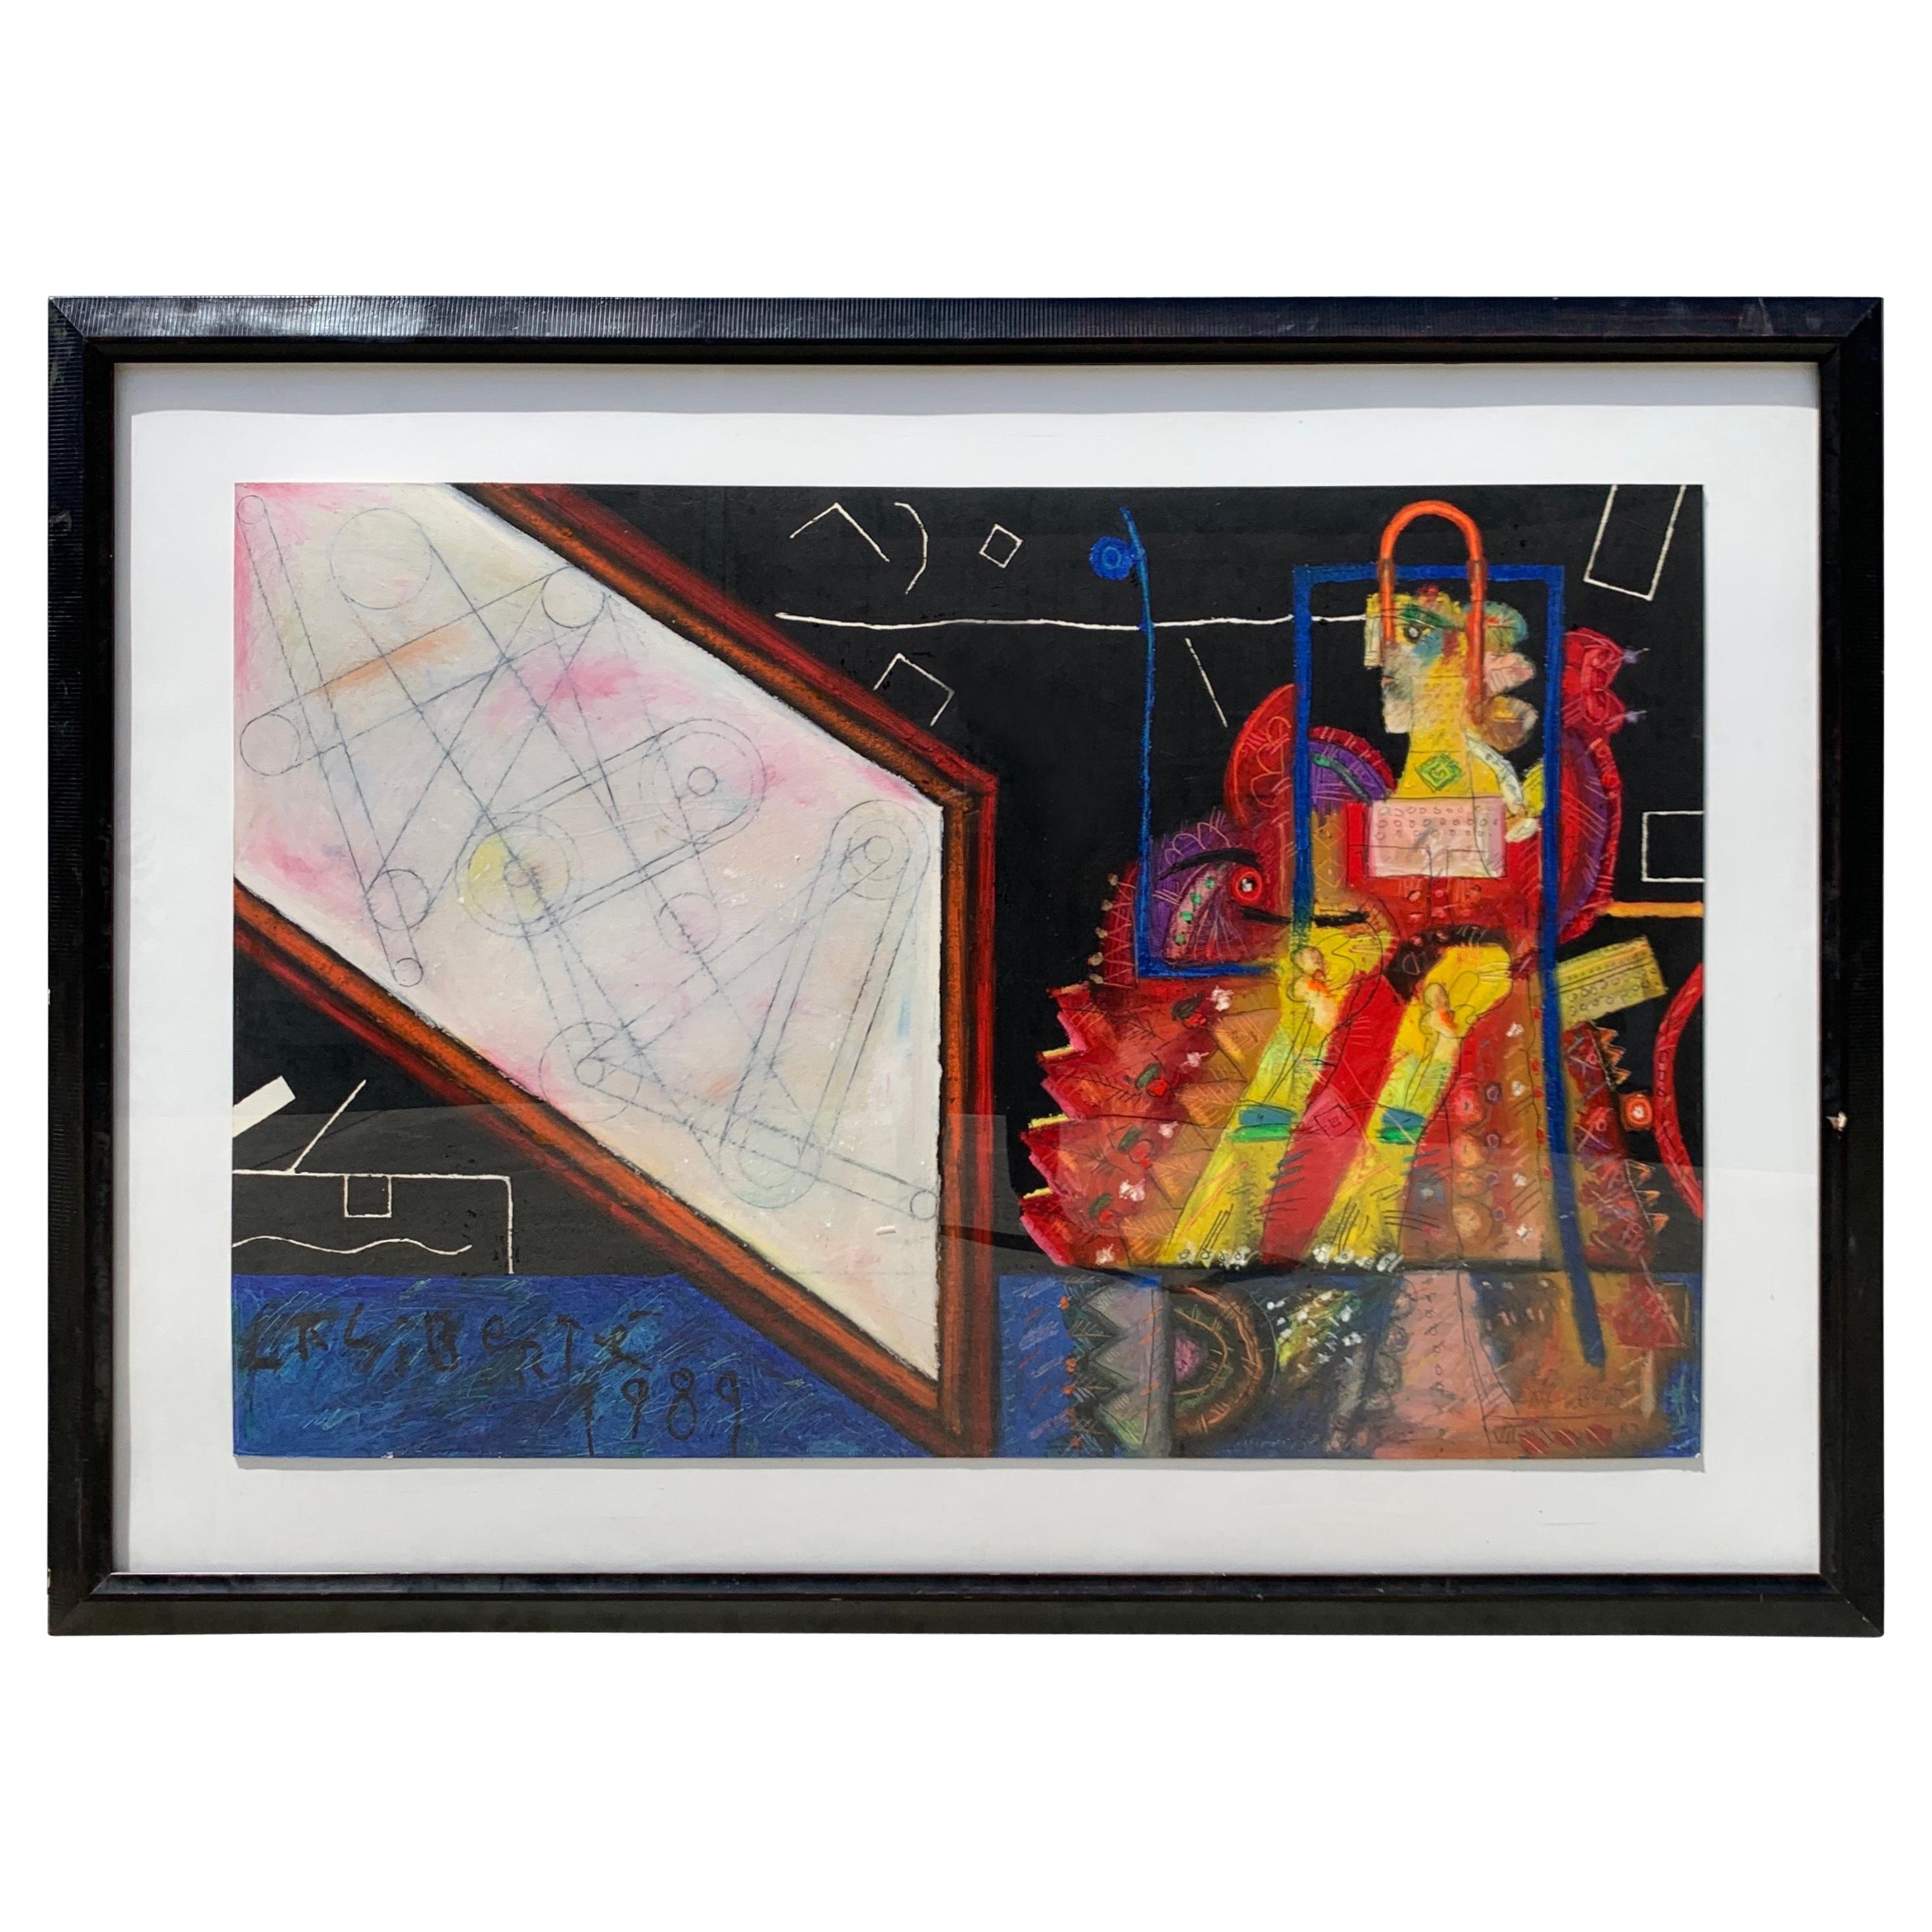 Monumental Norman Lalibertè Mixed Media Painting on Panel For Sale